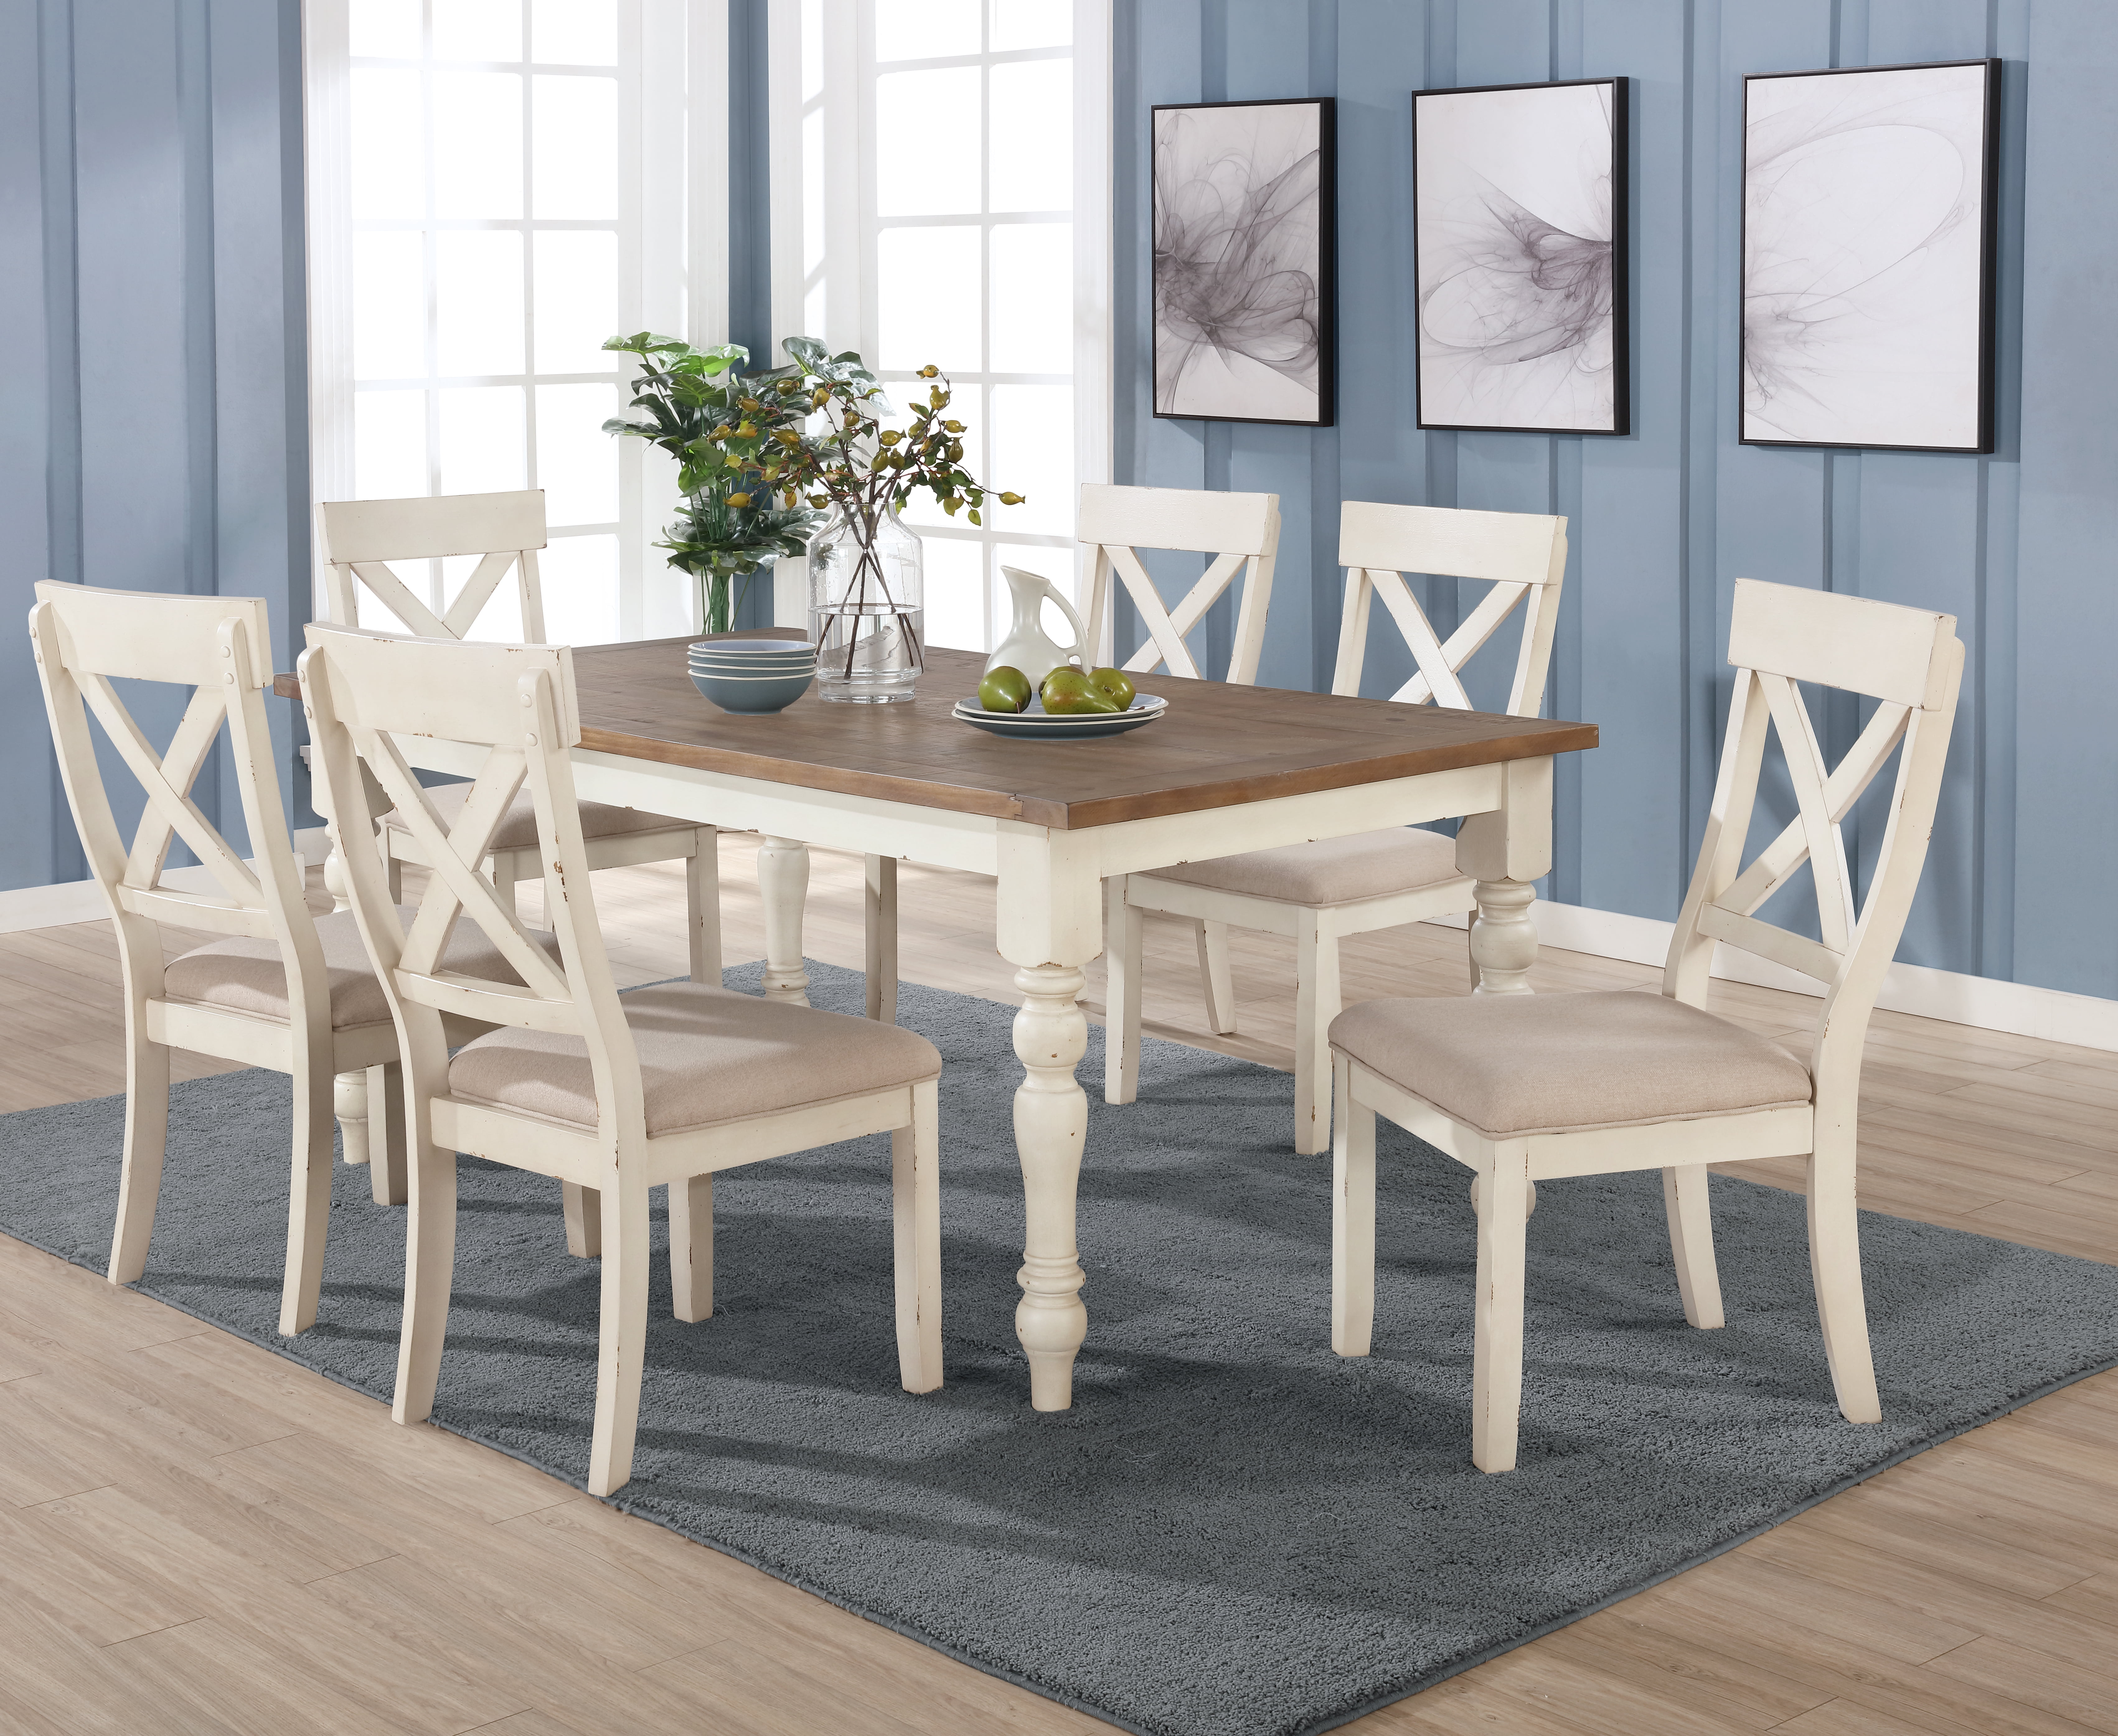 Roundhill Furniture Prato 7 Piece, Distressed White Dining Room Table Set